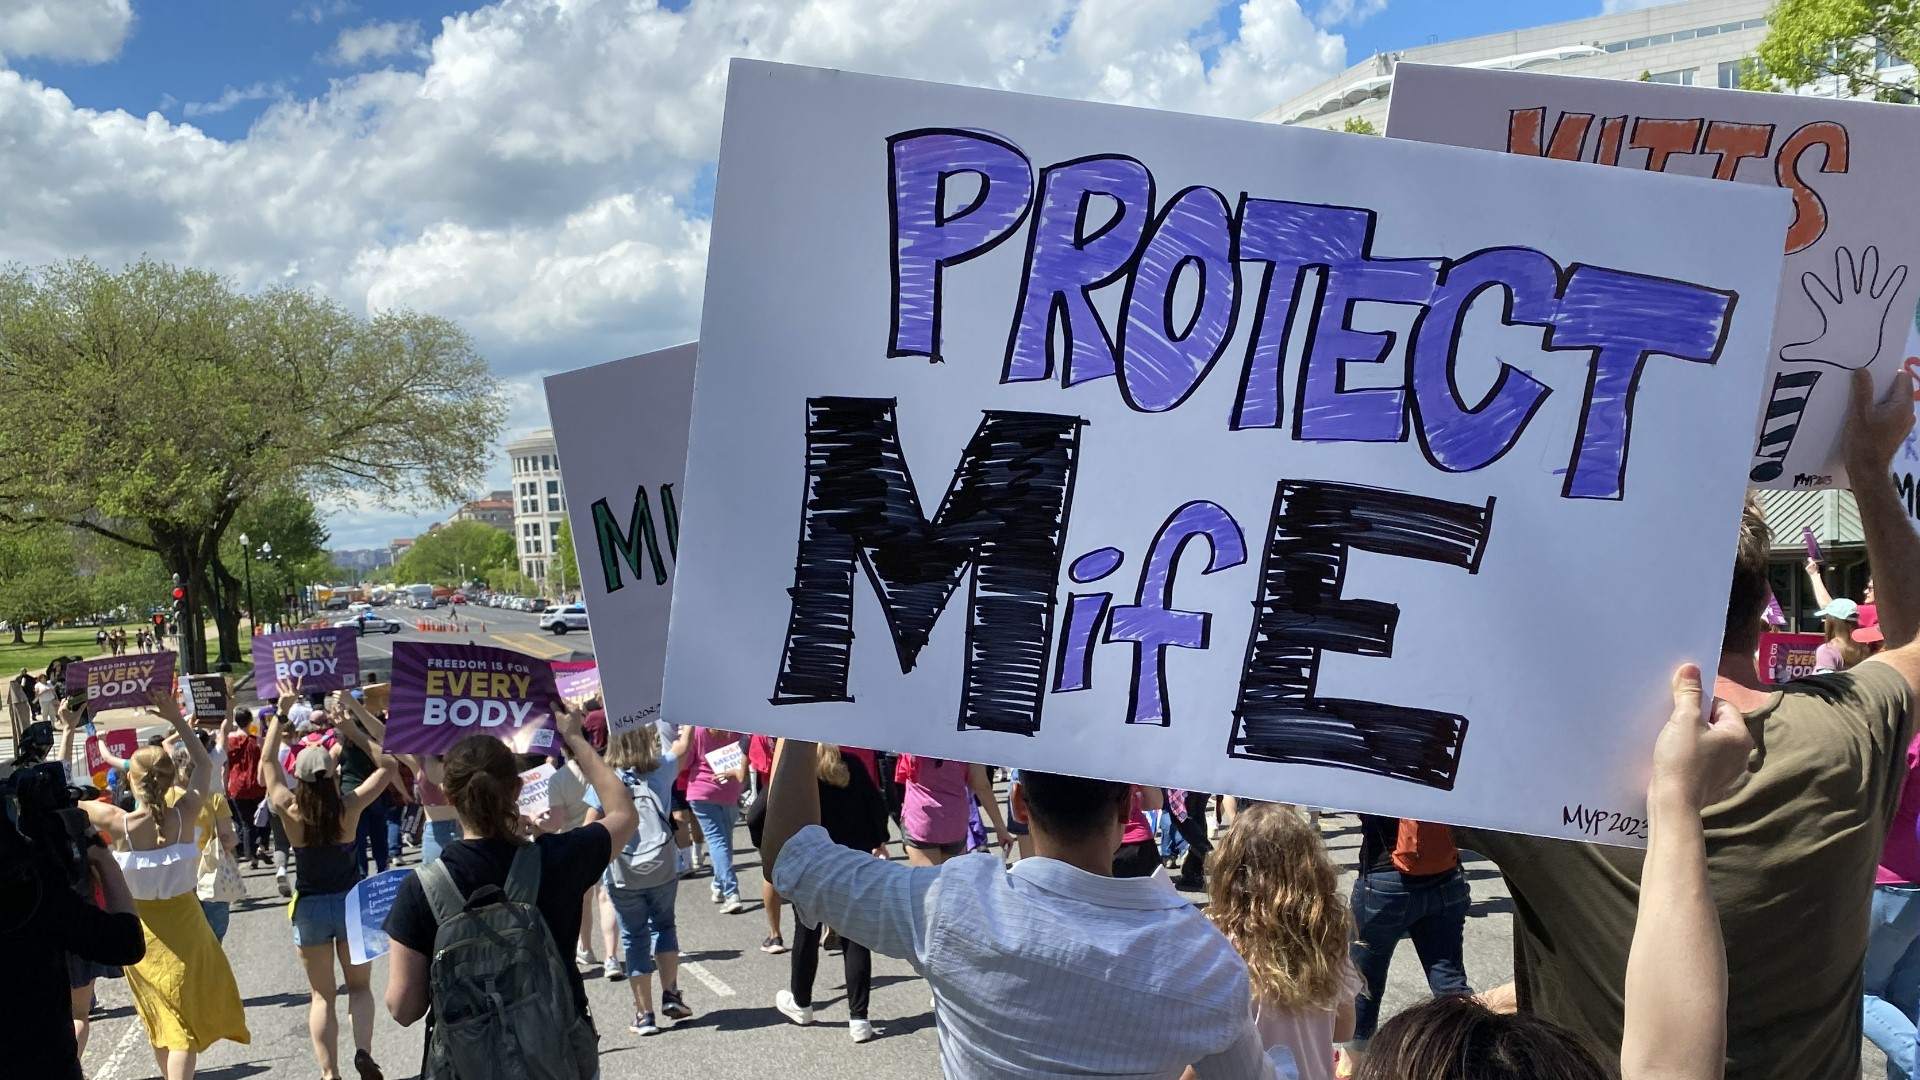 On Saturday, pro-choice demonstrators gathered outside the Supreme Court in D.C.